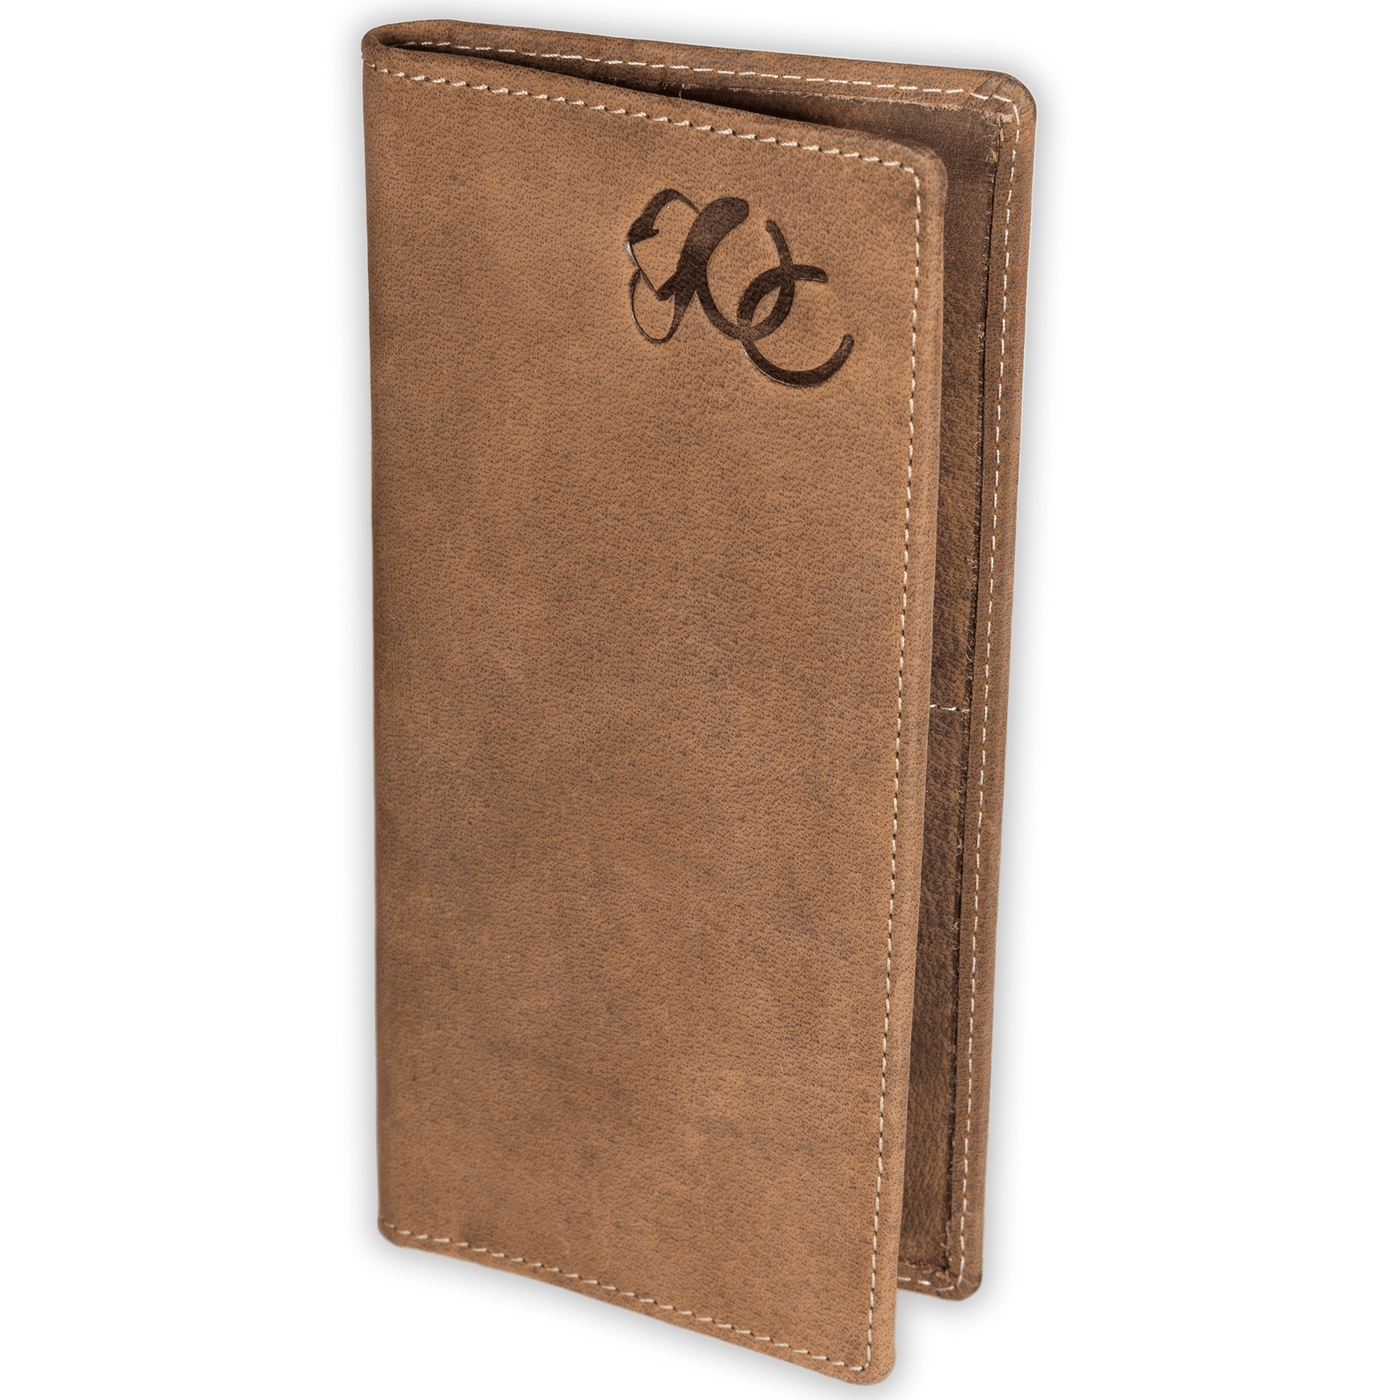 Urban Cowboy Apparel Wallet Brown Leather Rodeo Wallet